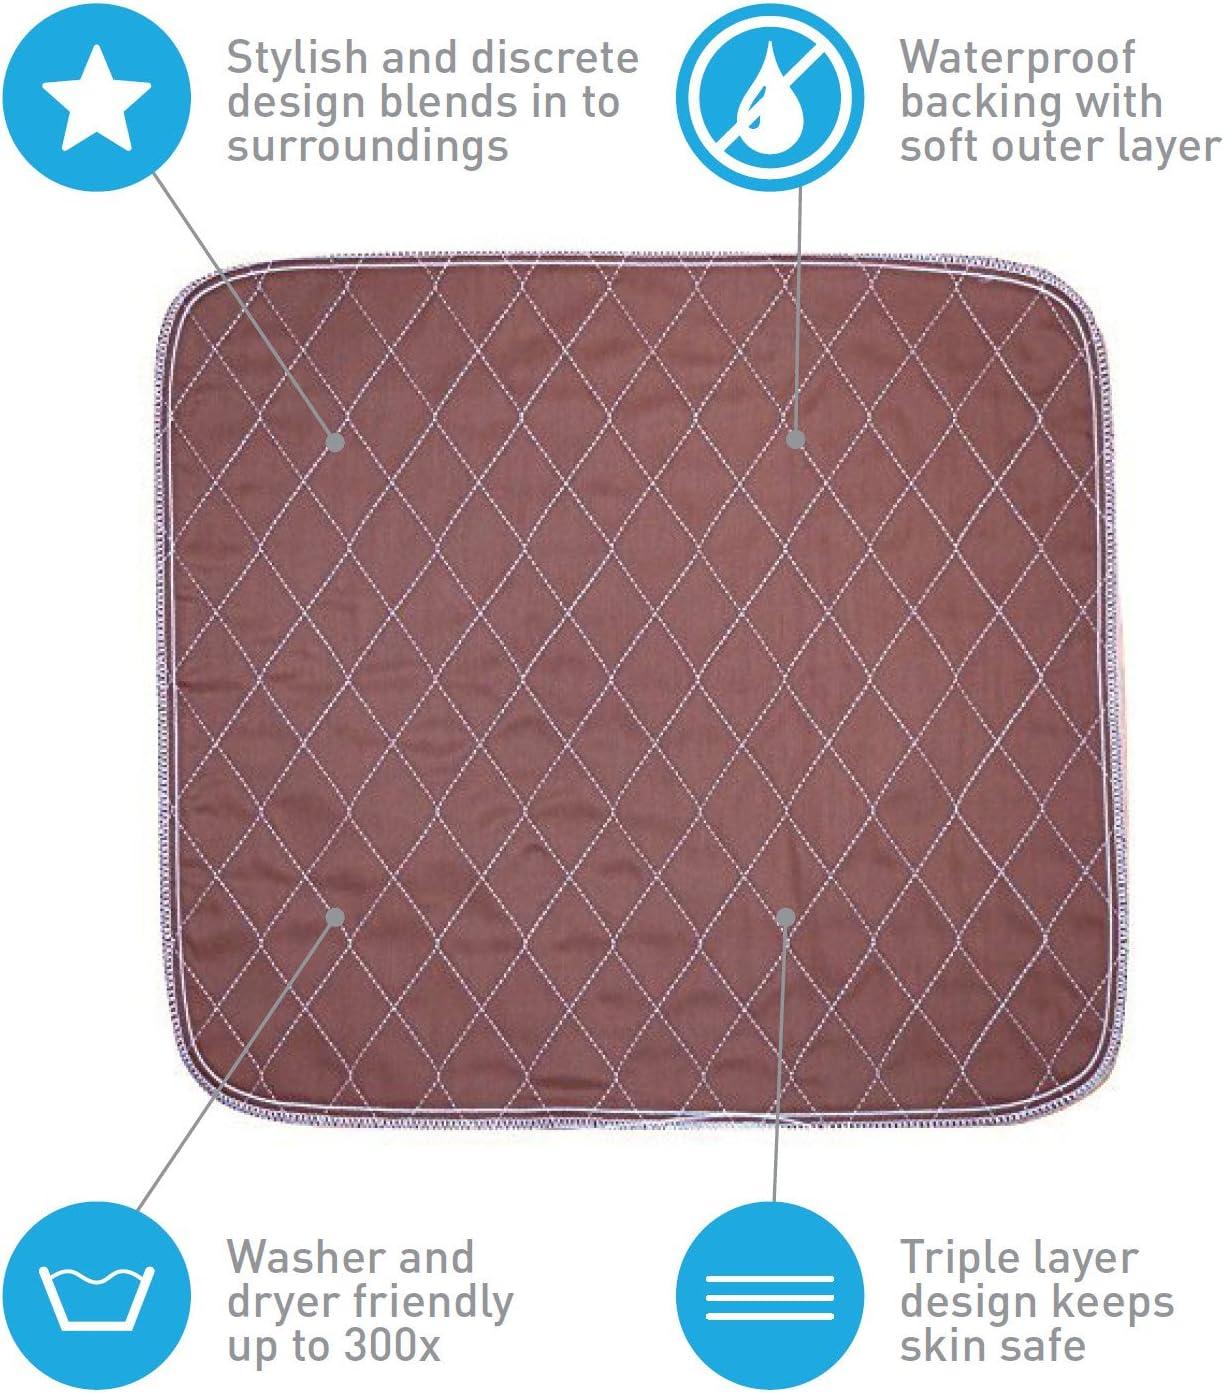 CareActive Quilted Waterproof Incontinence Seat Pad : protects furniture